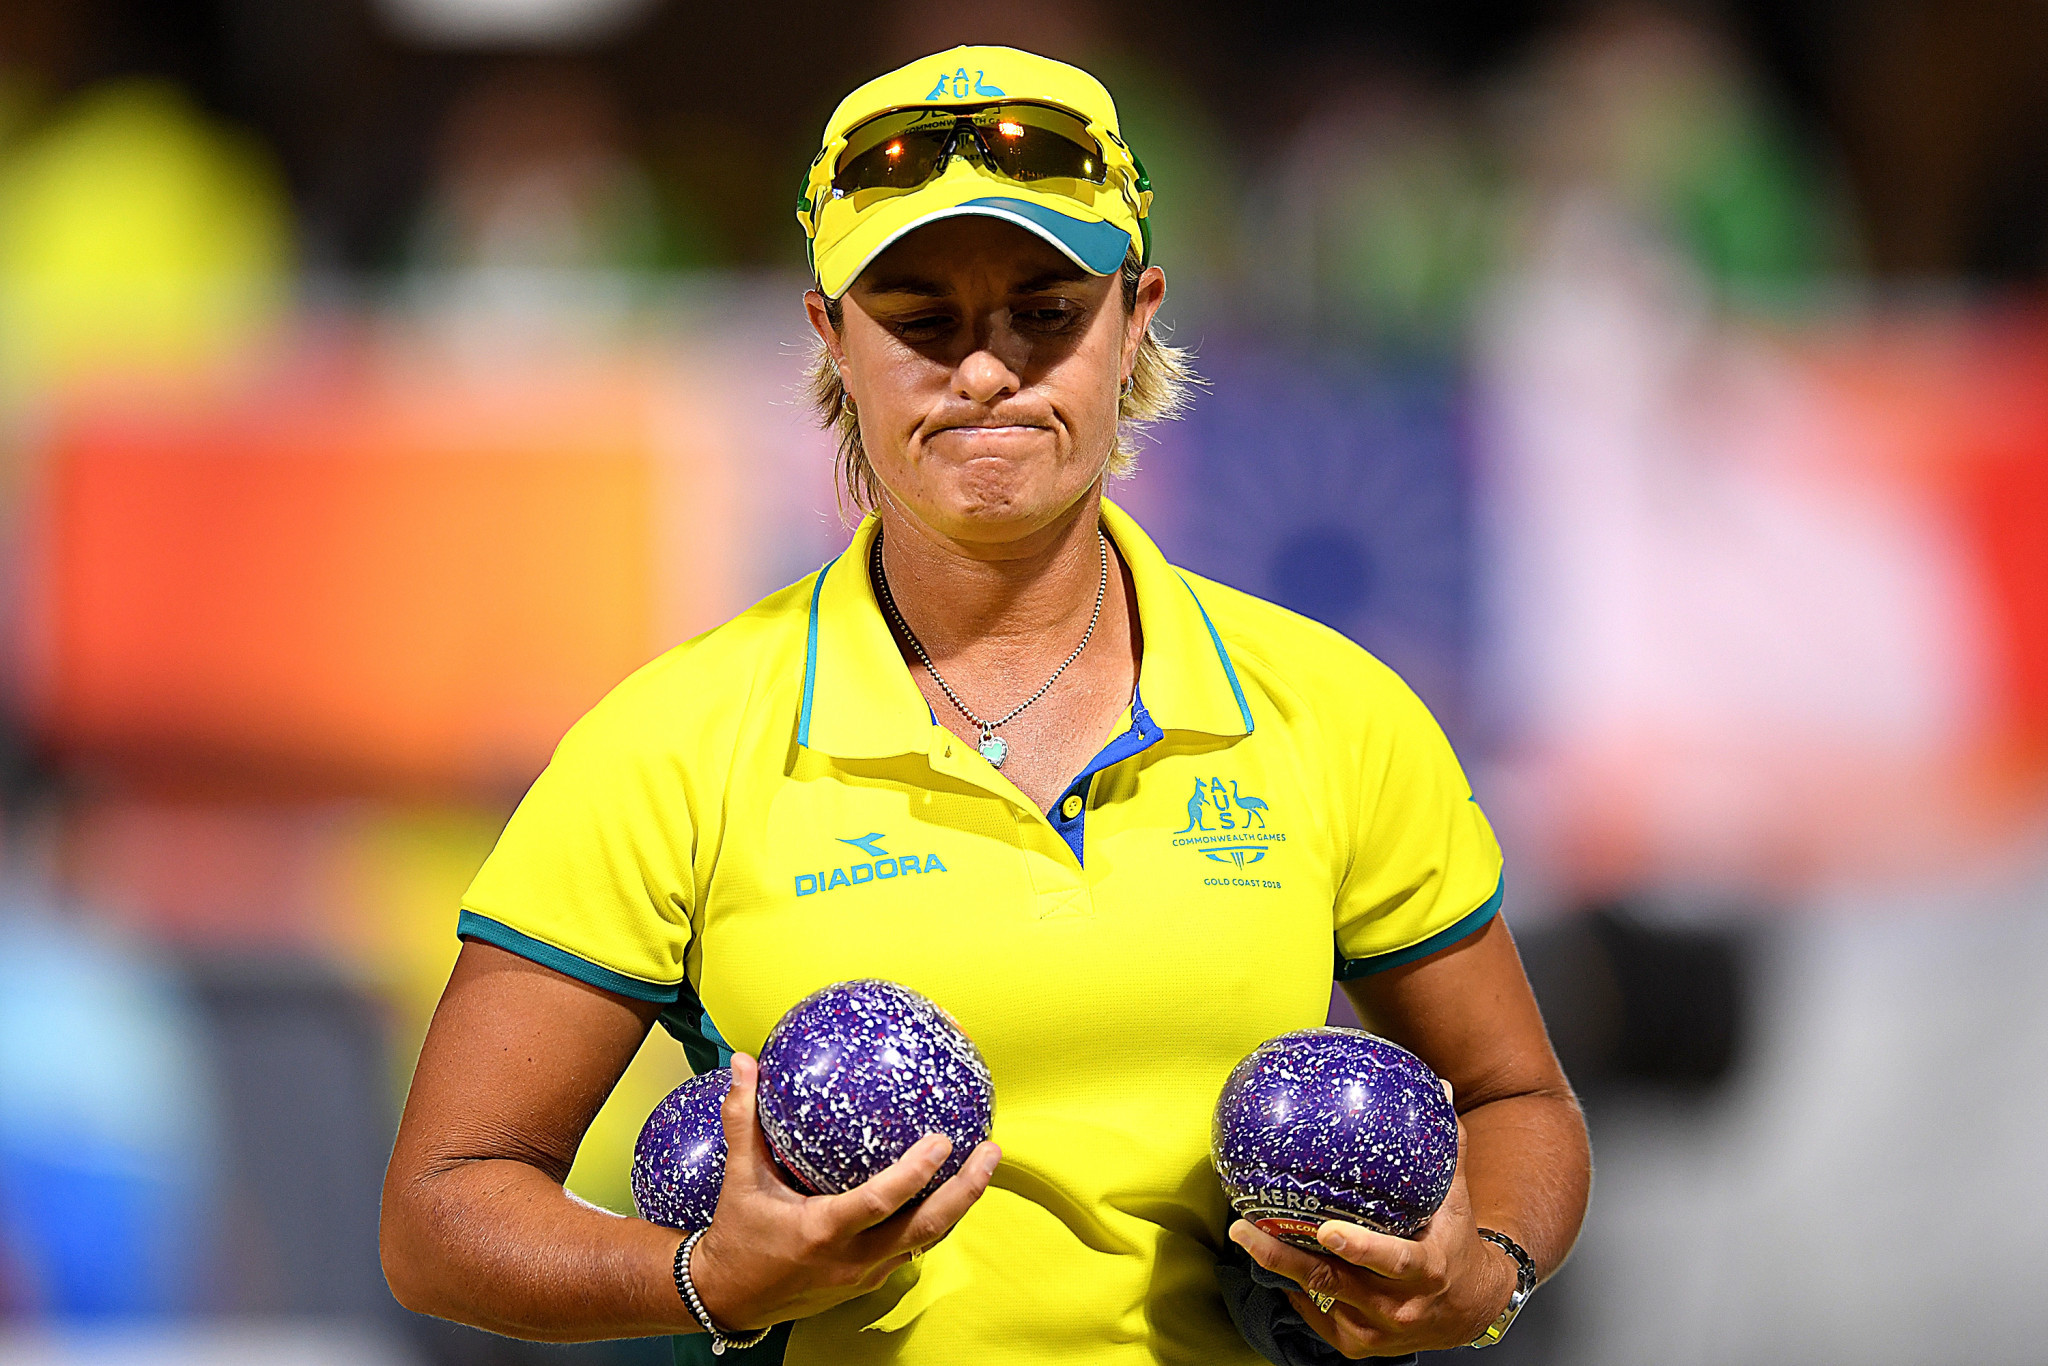 Day of shocks as home favourite beaten in bowls at Gold Coast 2018